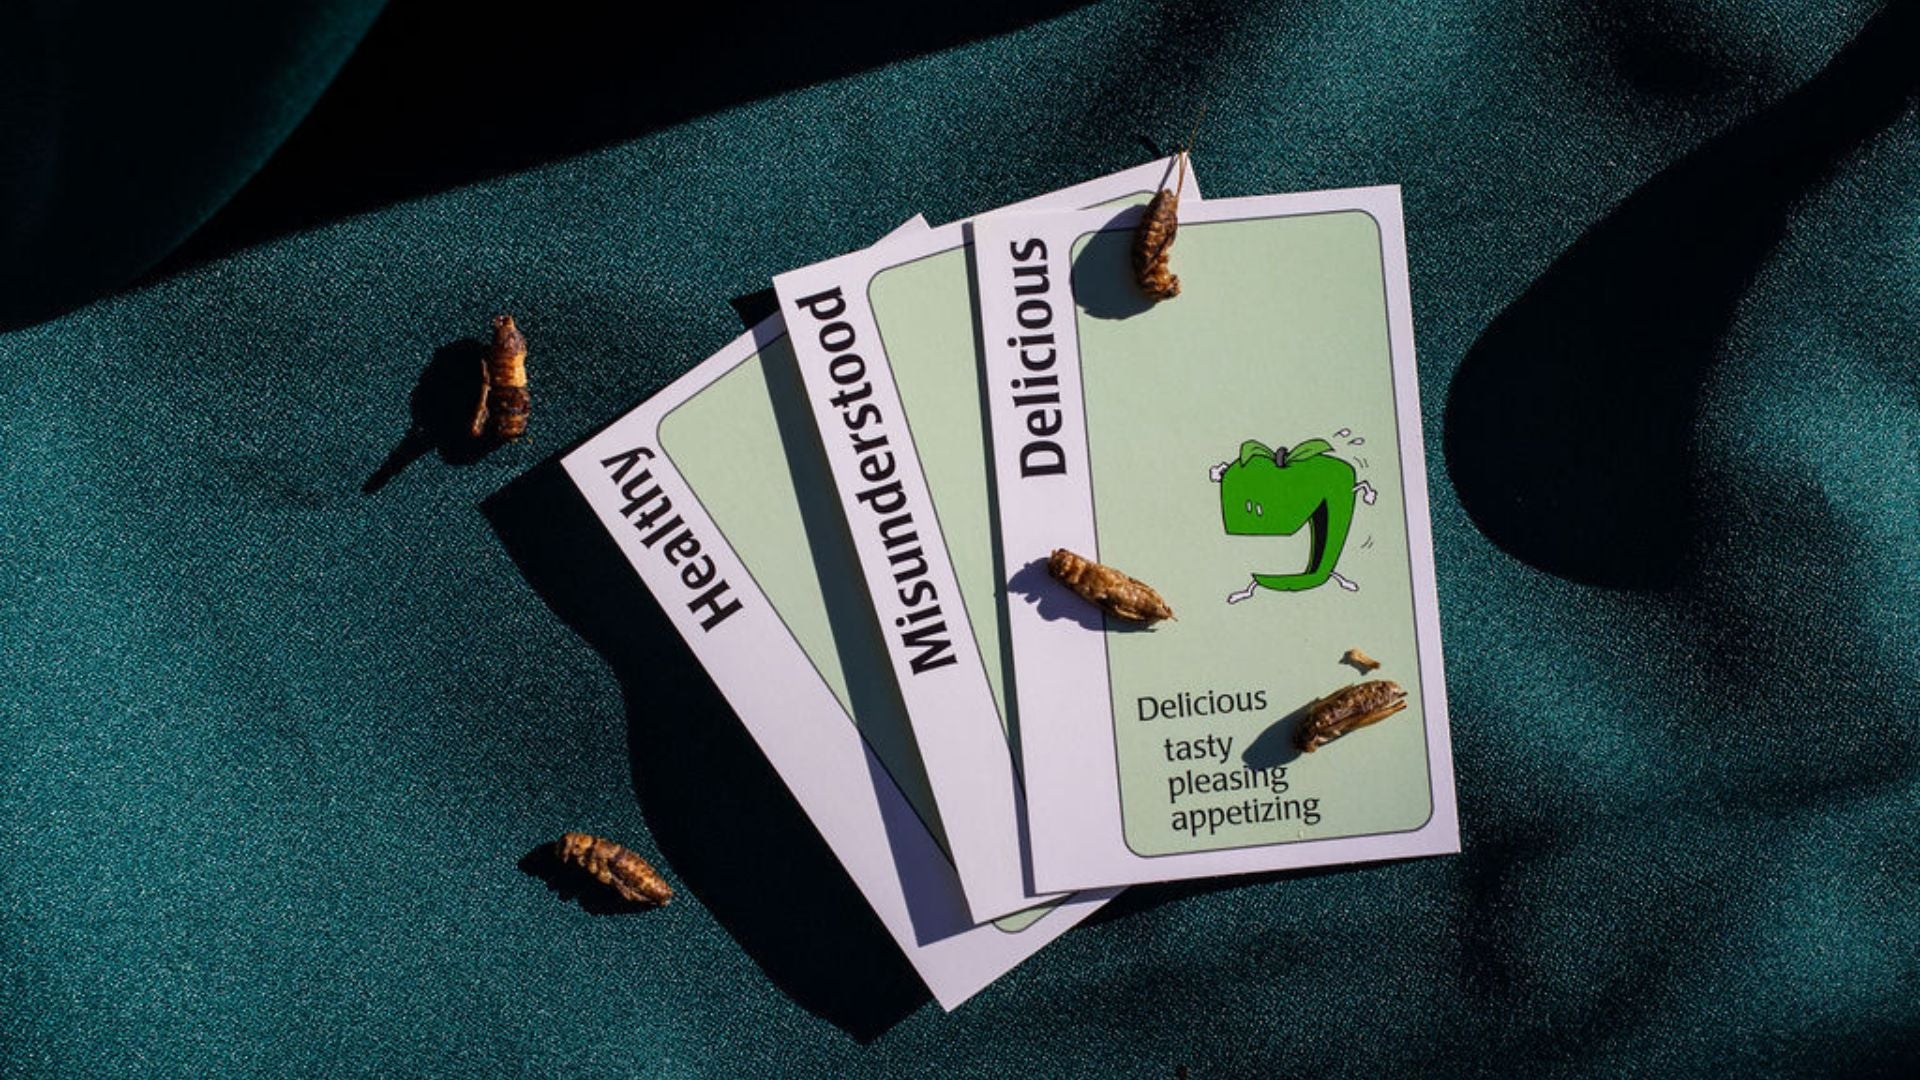 Bugs next to cards that say Healthy, Misunderstood, Delicious